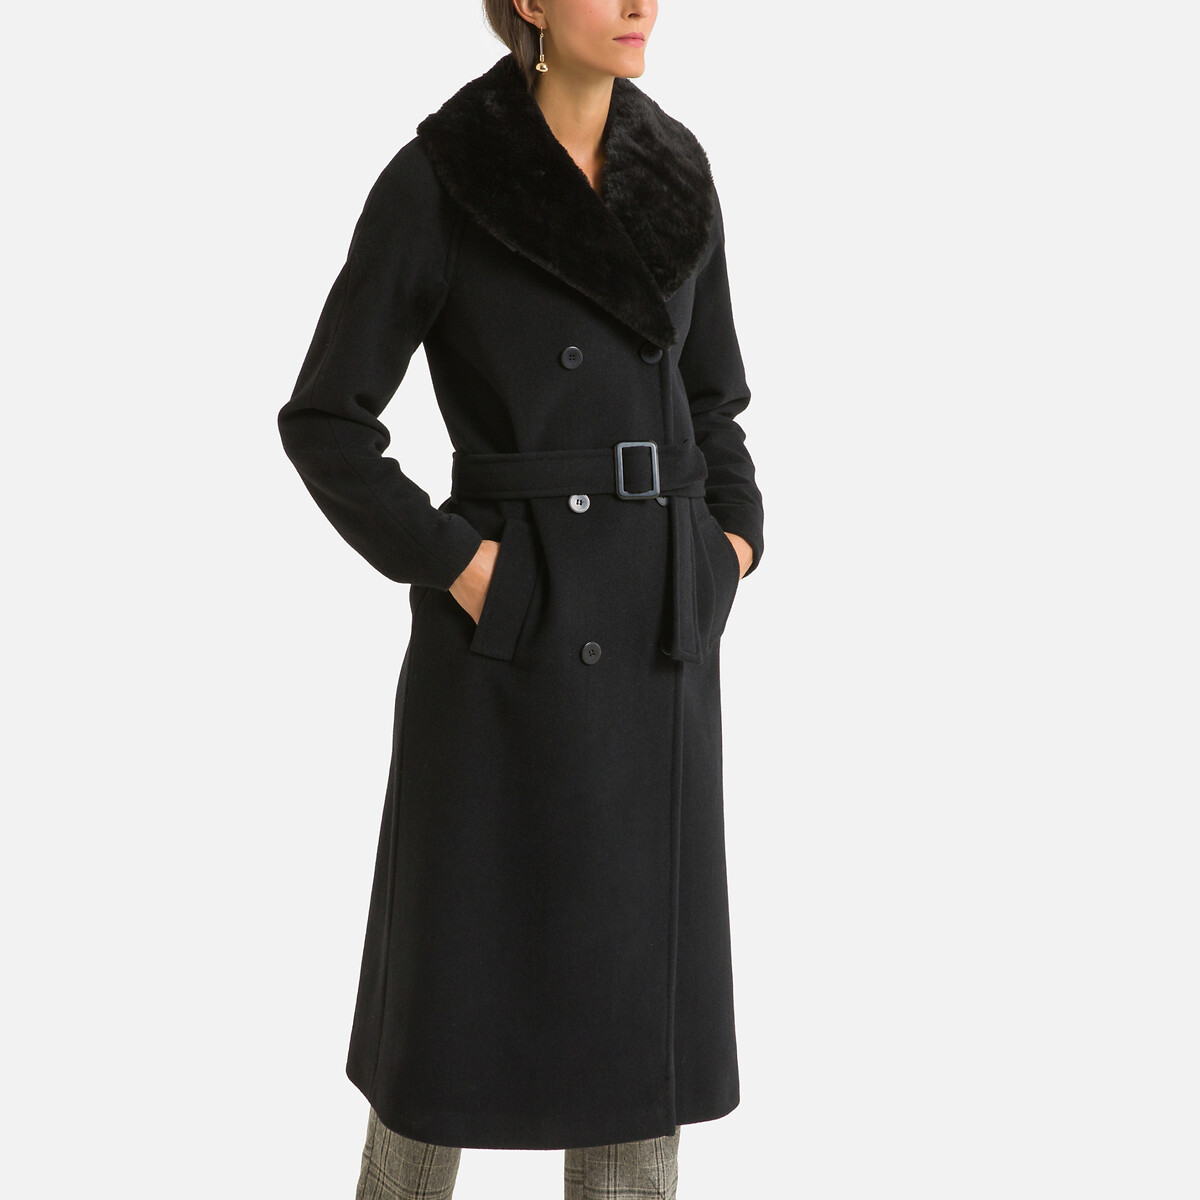 Image of Wool Mix Double-Breasted Coat with Faux Fur Collar and Pockets